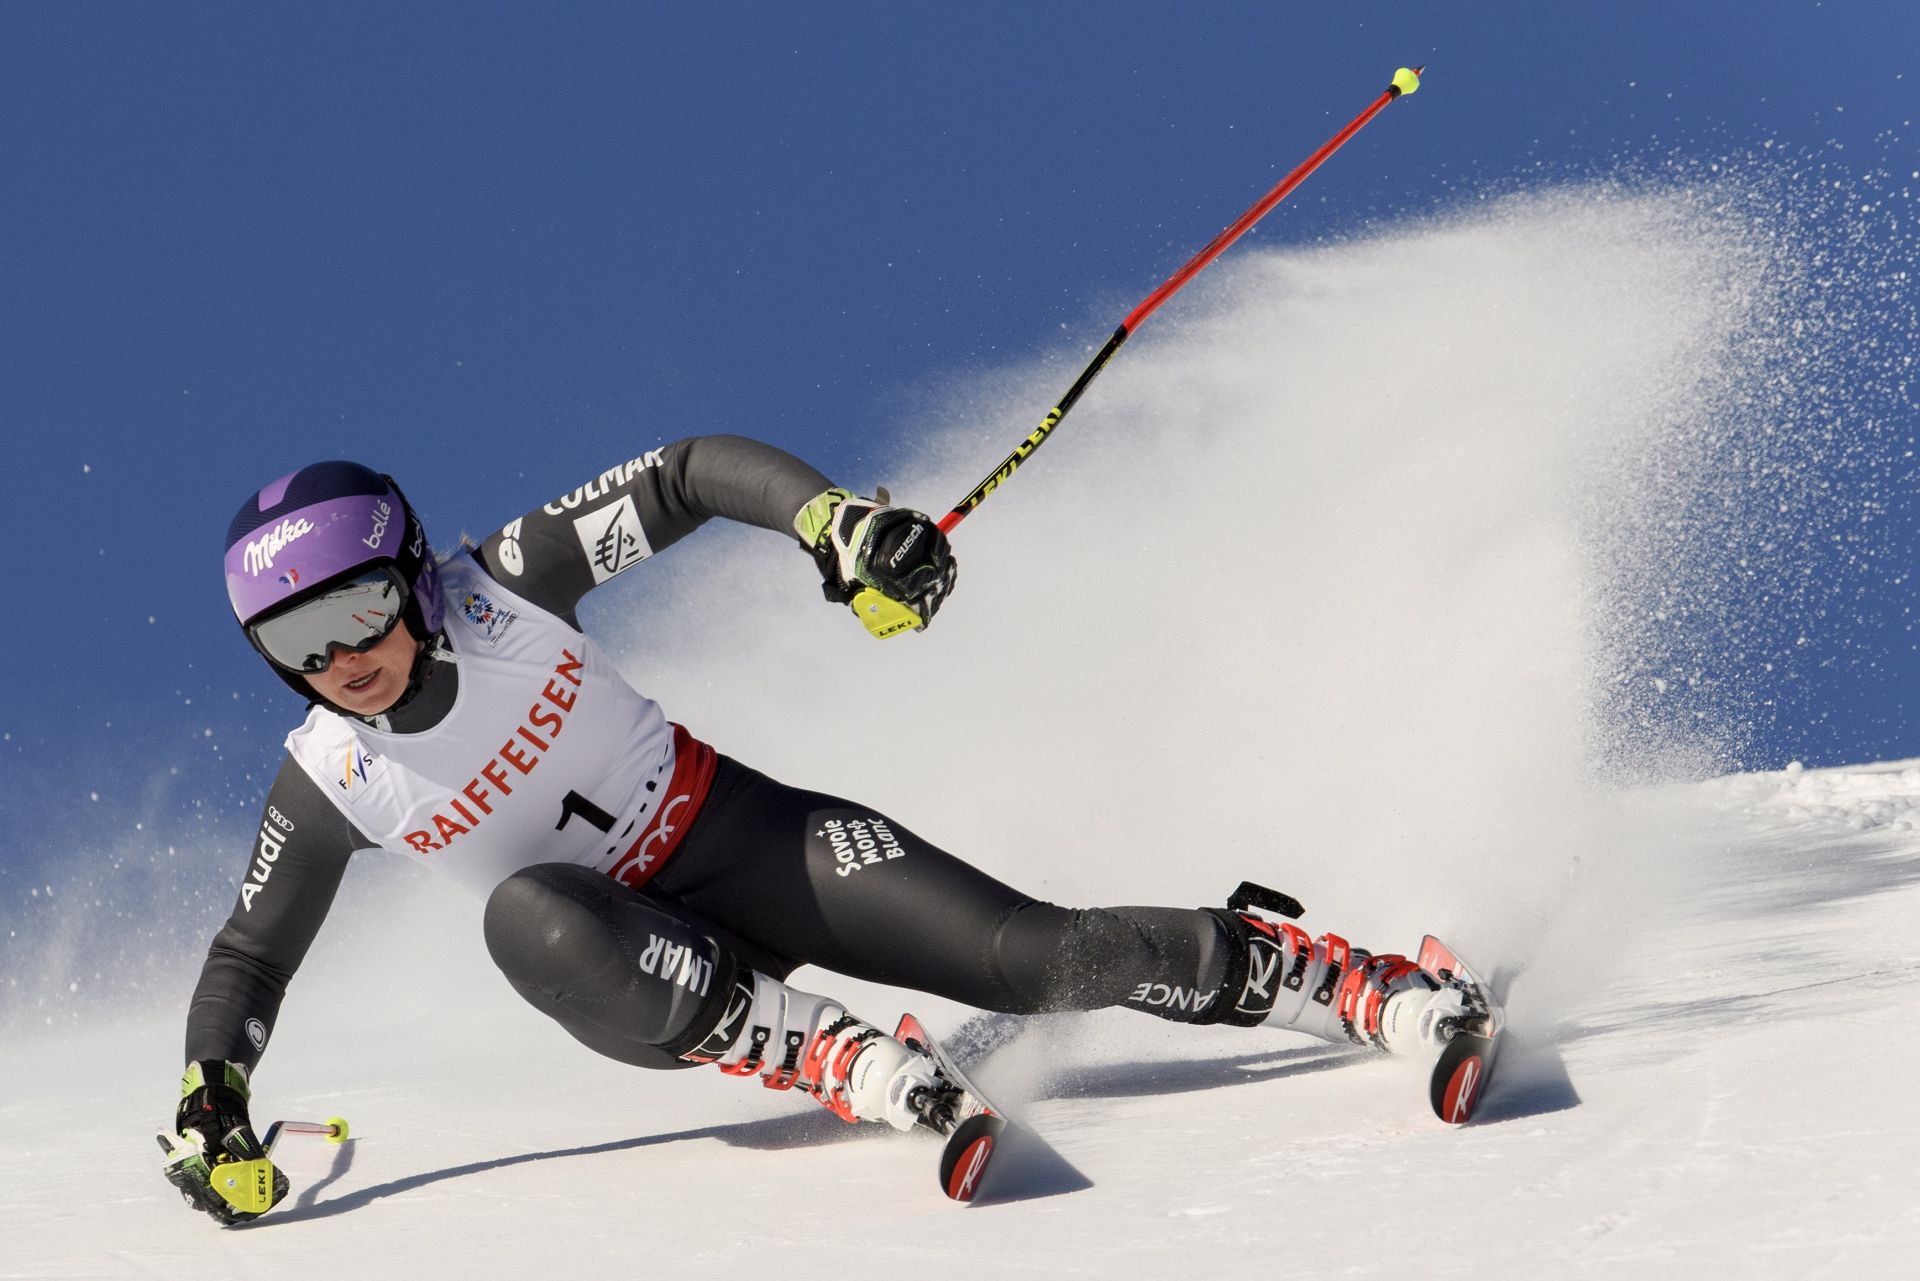 epa05796238 Tessa Worley of France in action during the first run of the Women's Giant Slalom race at the 2017 FIS Alpine Skiing World Championships in St. Moritz, Switzerland, 16 February 2017.  EPA/GIAN EHRENZELLER